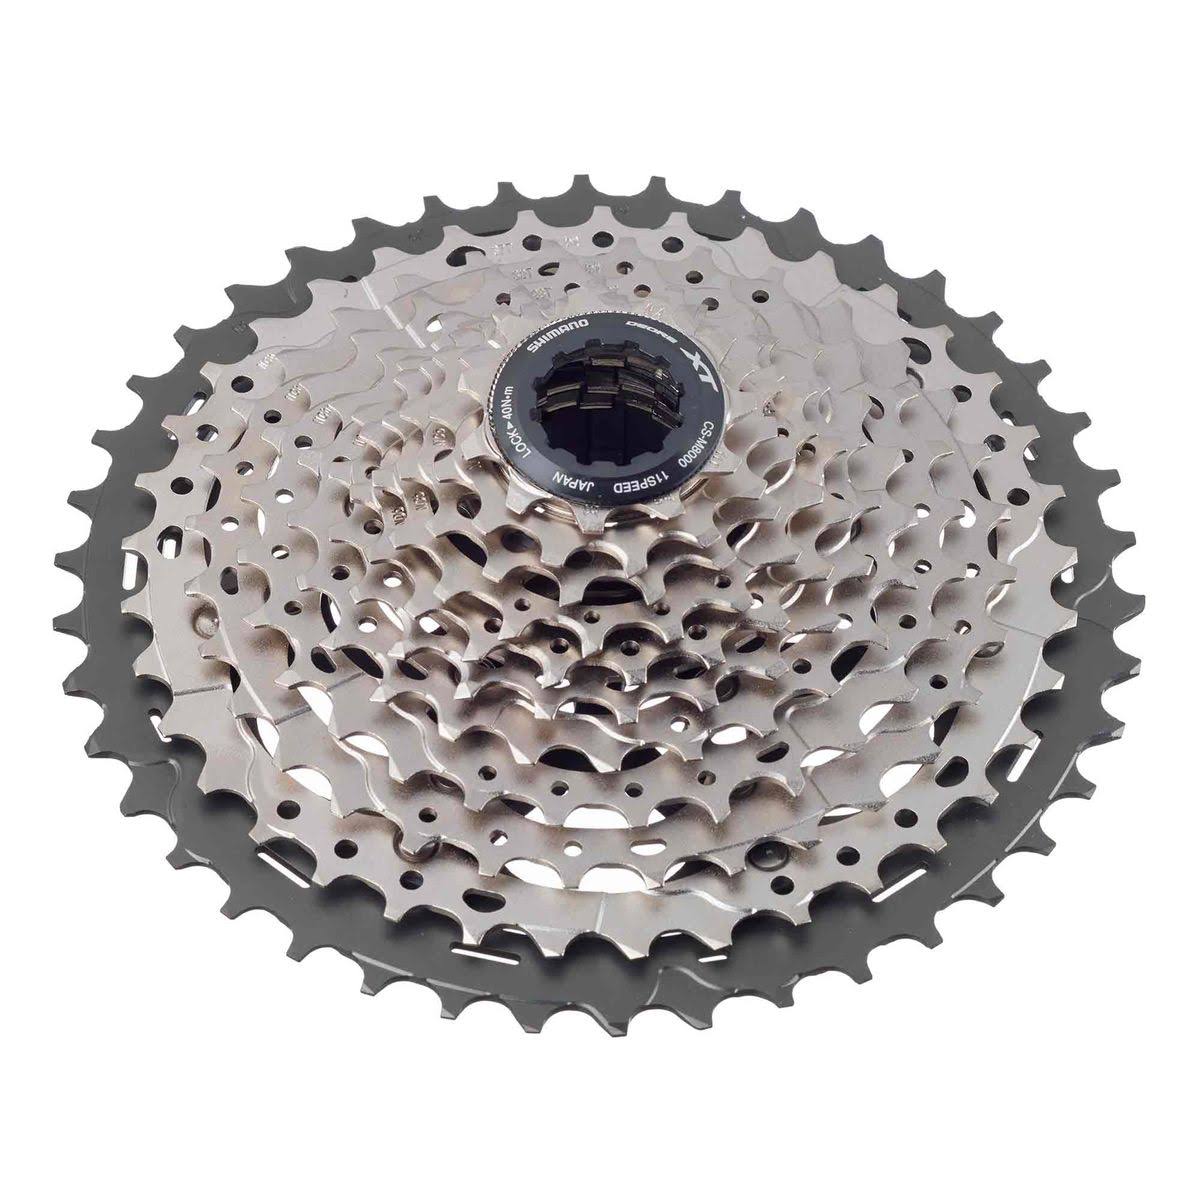 Shimano XT M8000 Deore Groupset 11-Speed Cassette - 11-40T, Silver